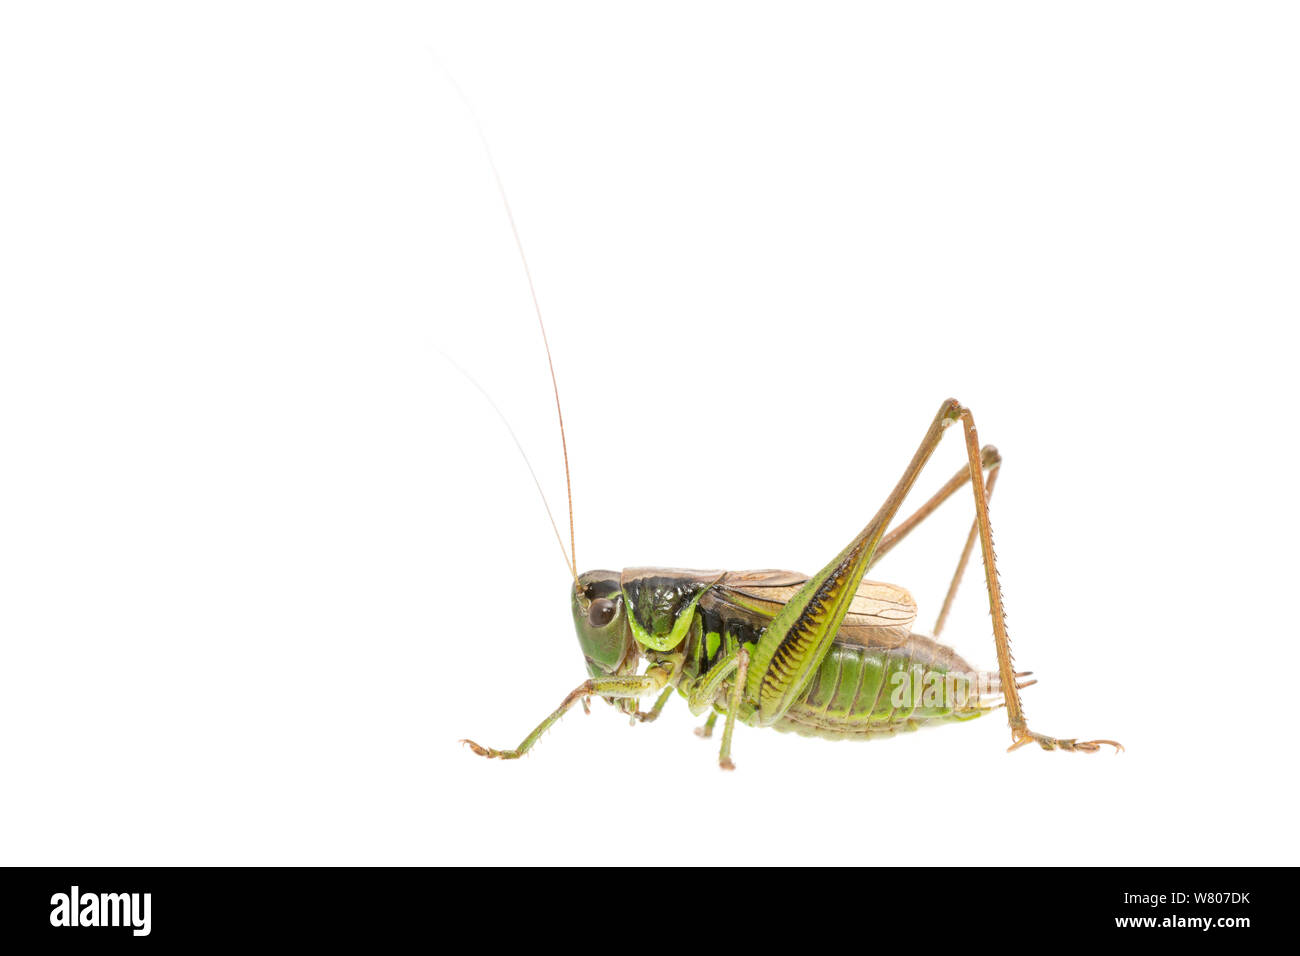 Roesel’s bush cricket (Metrioptera roeselii) male, The Netherlands, July. Meetyourneighbours.net project Stock Photo